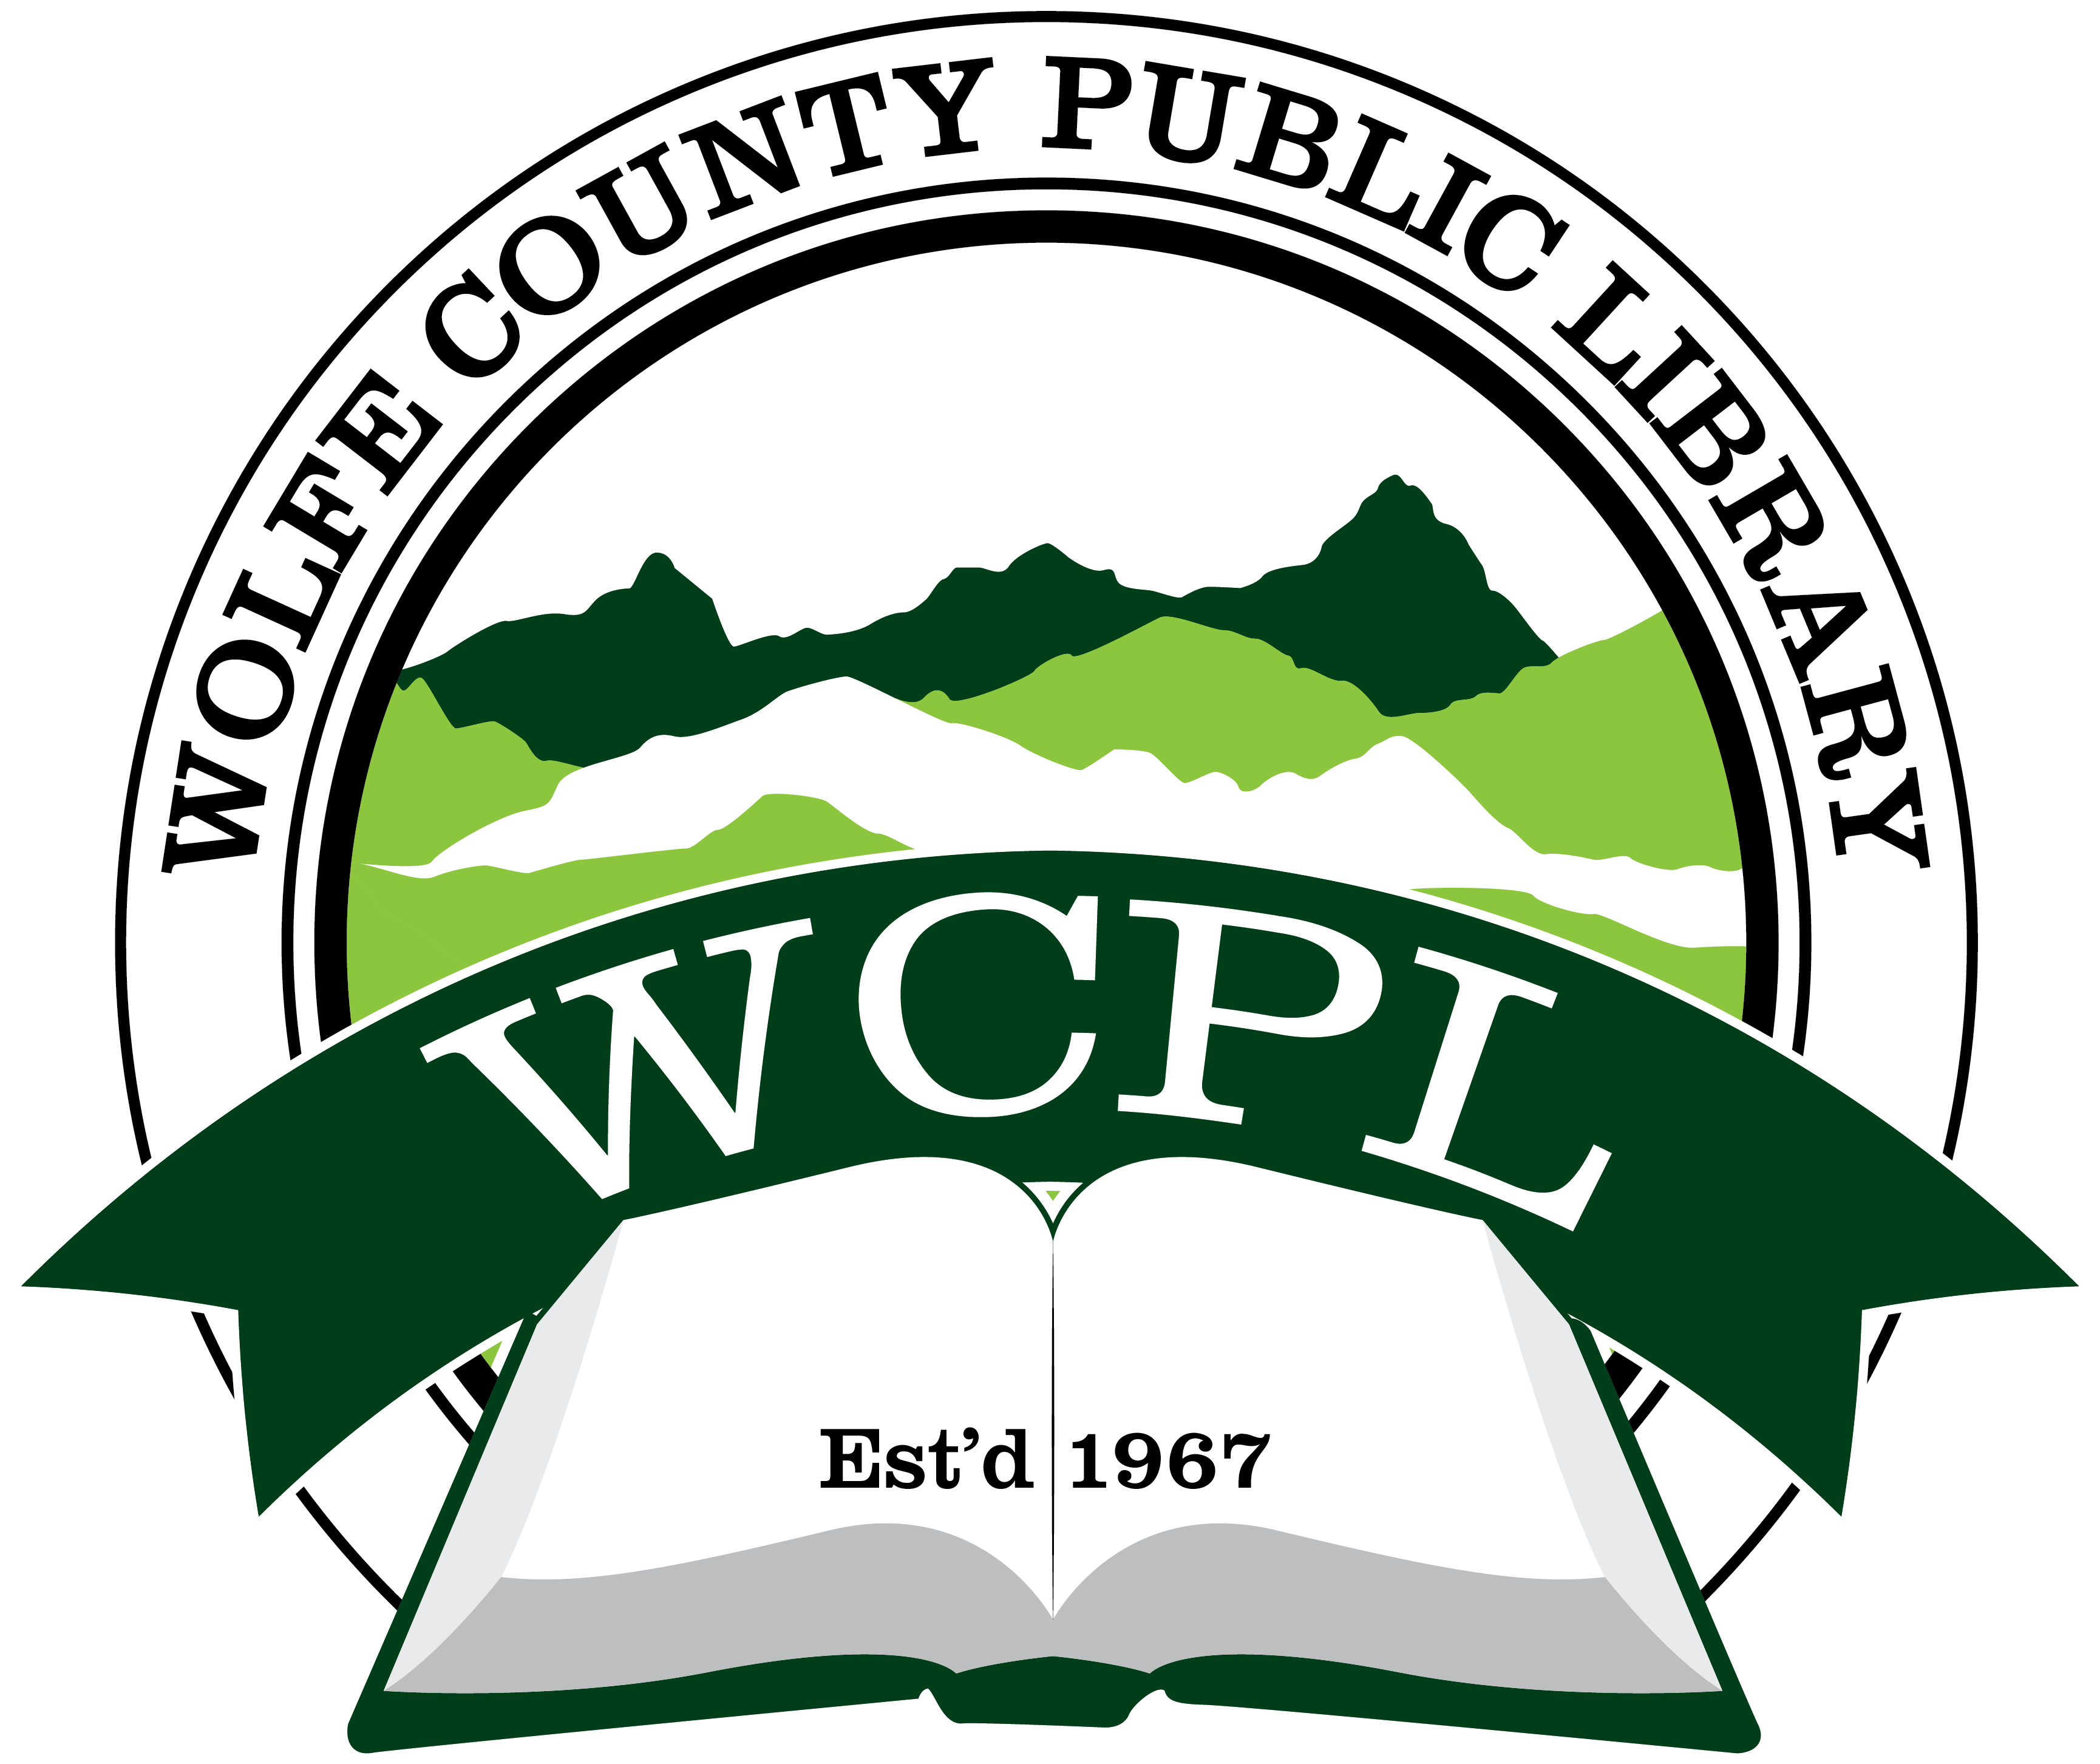 Wolfe County Public Library Logo Design By Derek Price - Air Force Chaplain Corps (3459x2905)